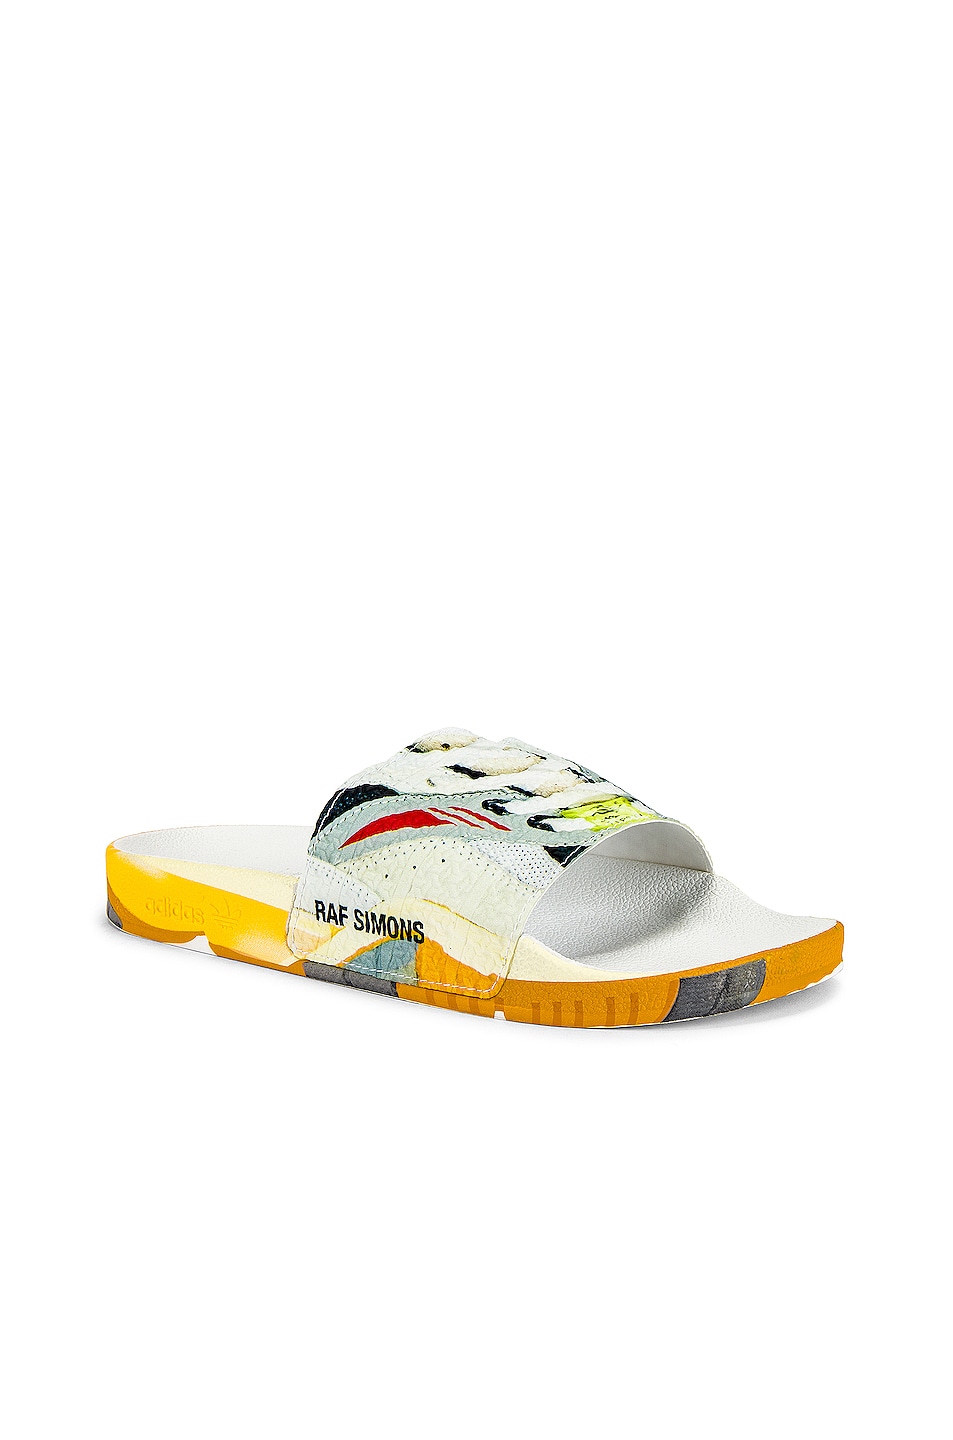 Image 1 of adidas by Raf Simons Torsion Adilette Slides in White & Multi